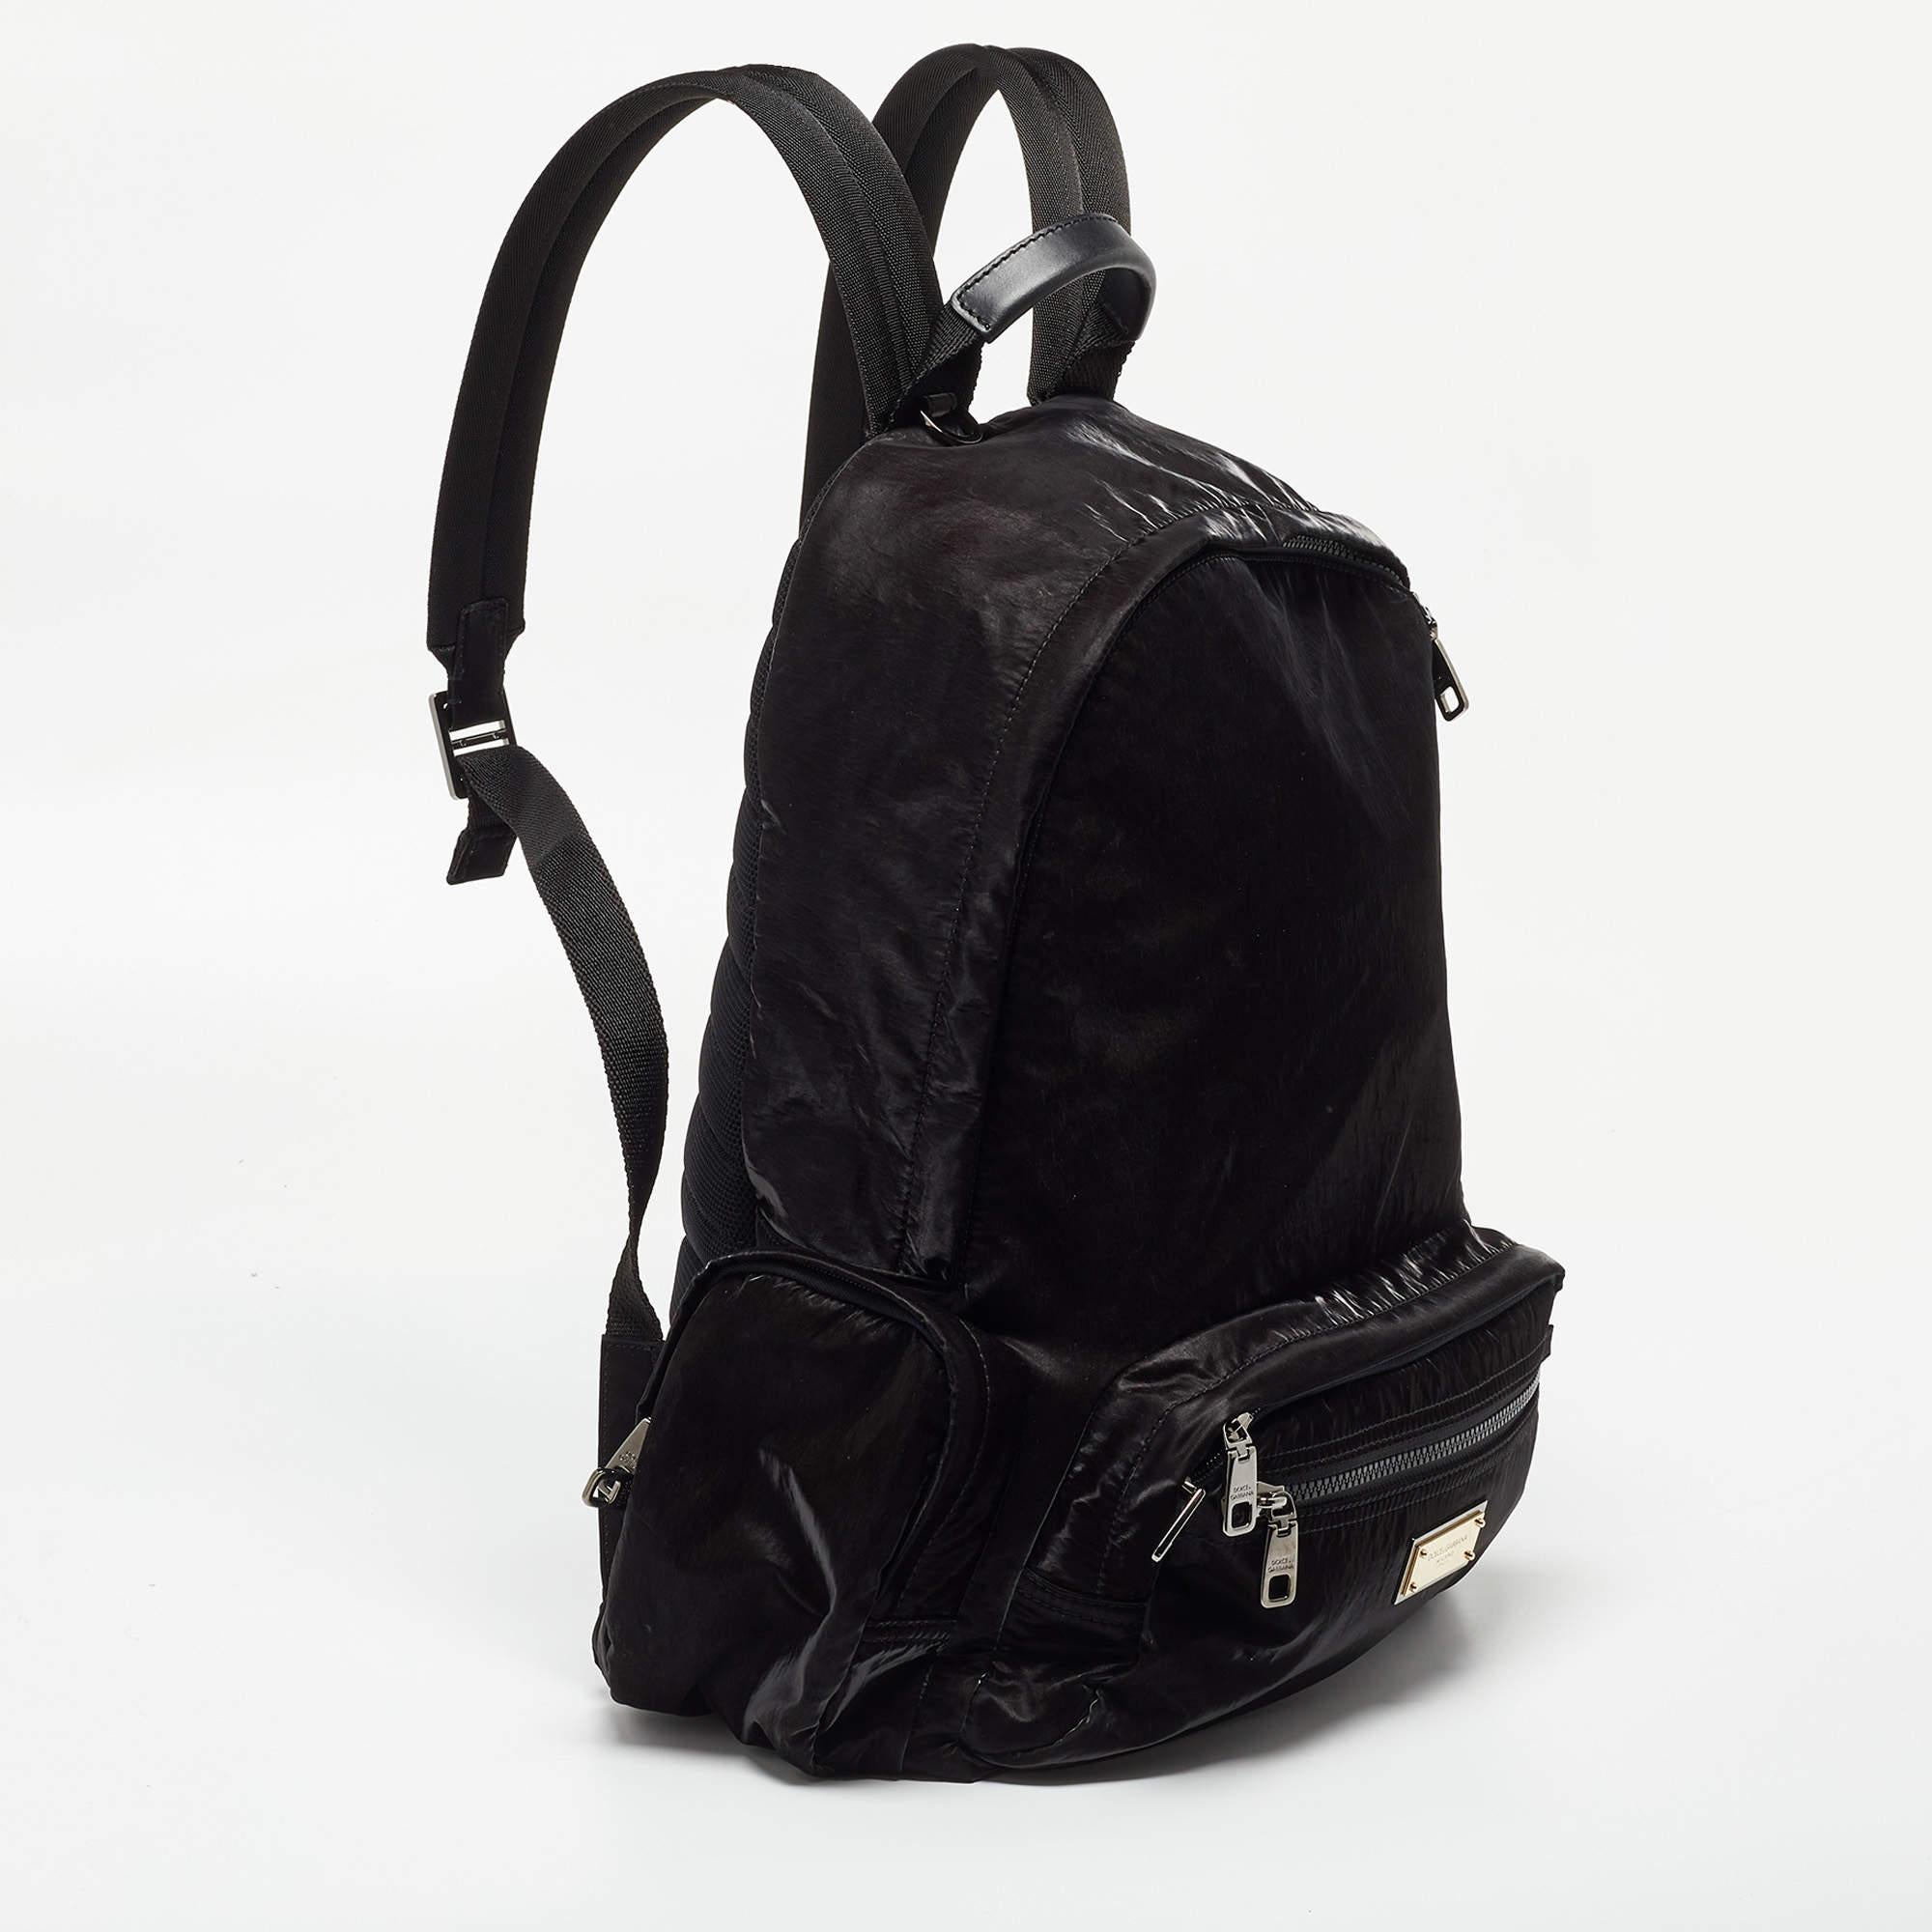 A design of high appeal, this backpack by Dolce & Gabbana will come in handy for daily use or on your travels. It is crafted from nylon and has a spacious interior. Two shoulder straps and a small top handle make it ready to be yours.

